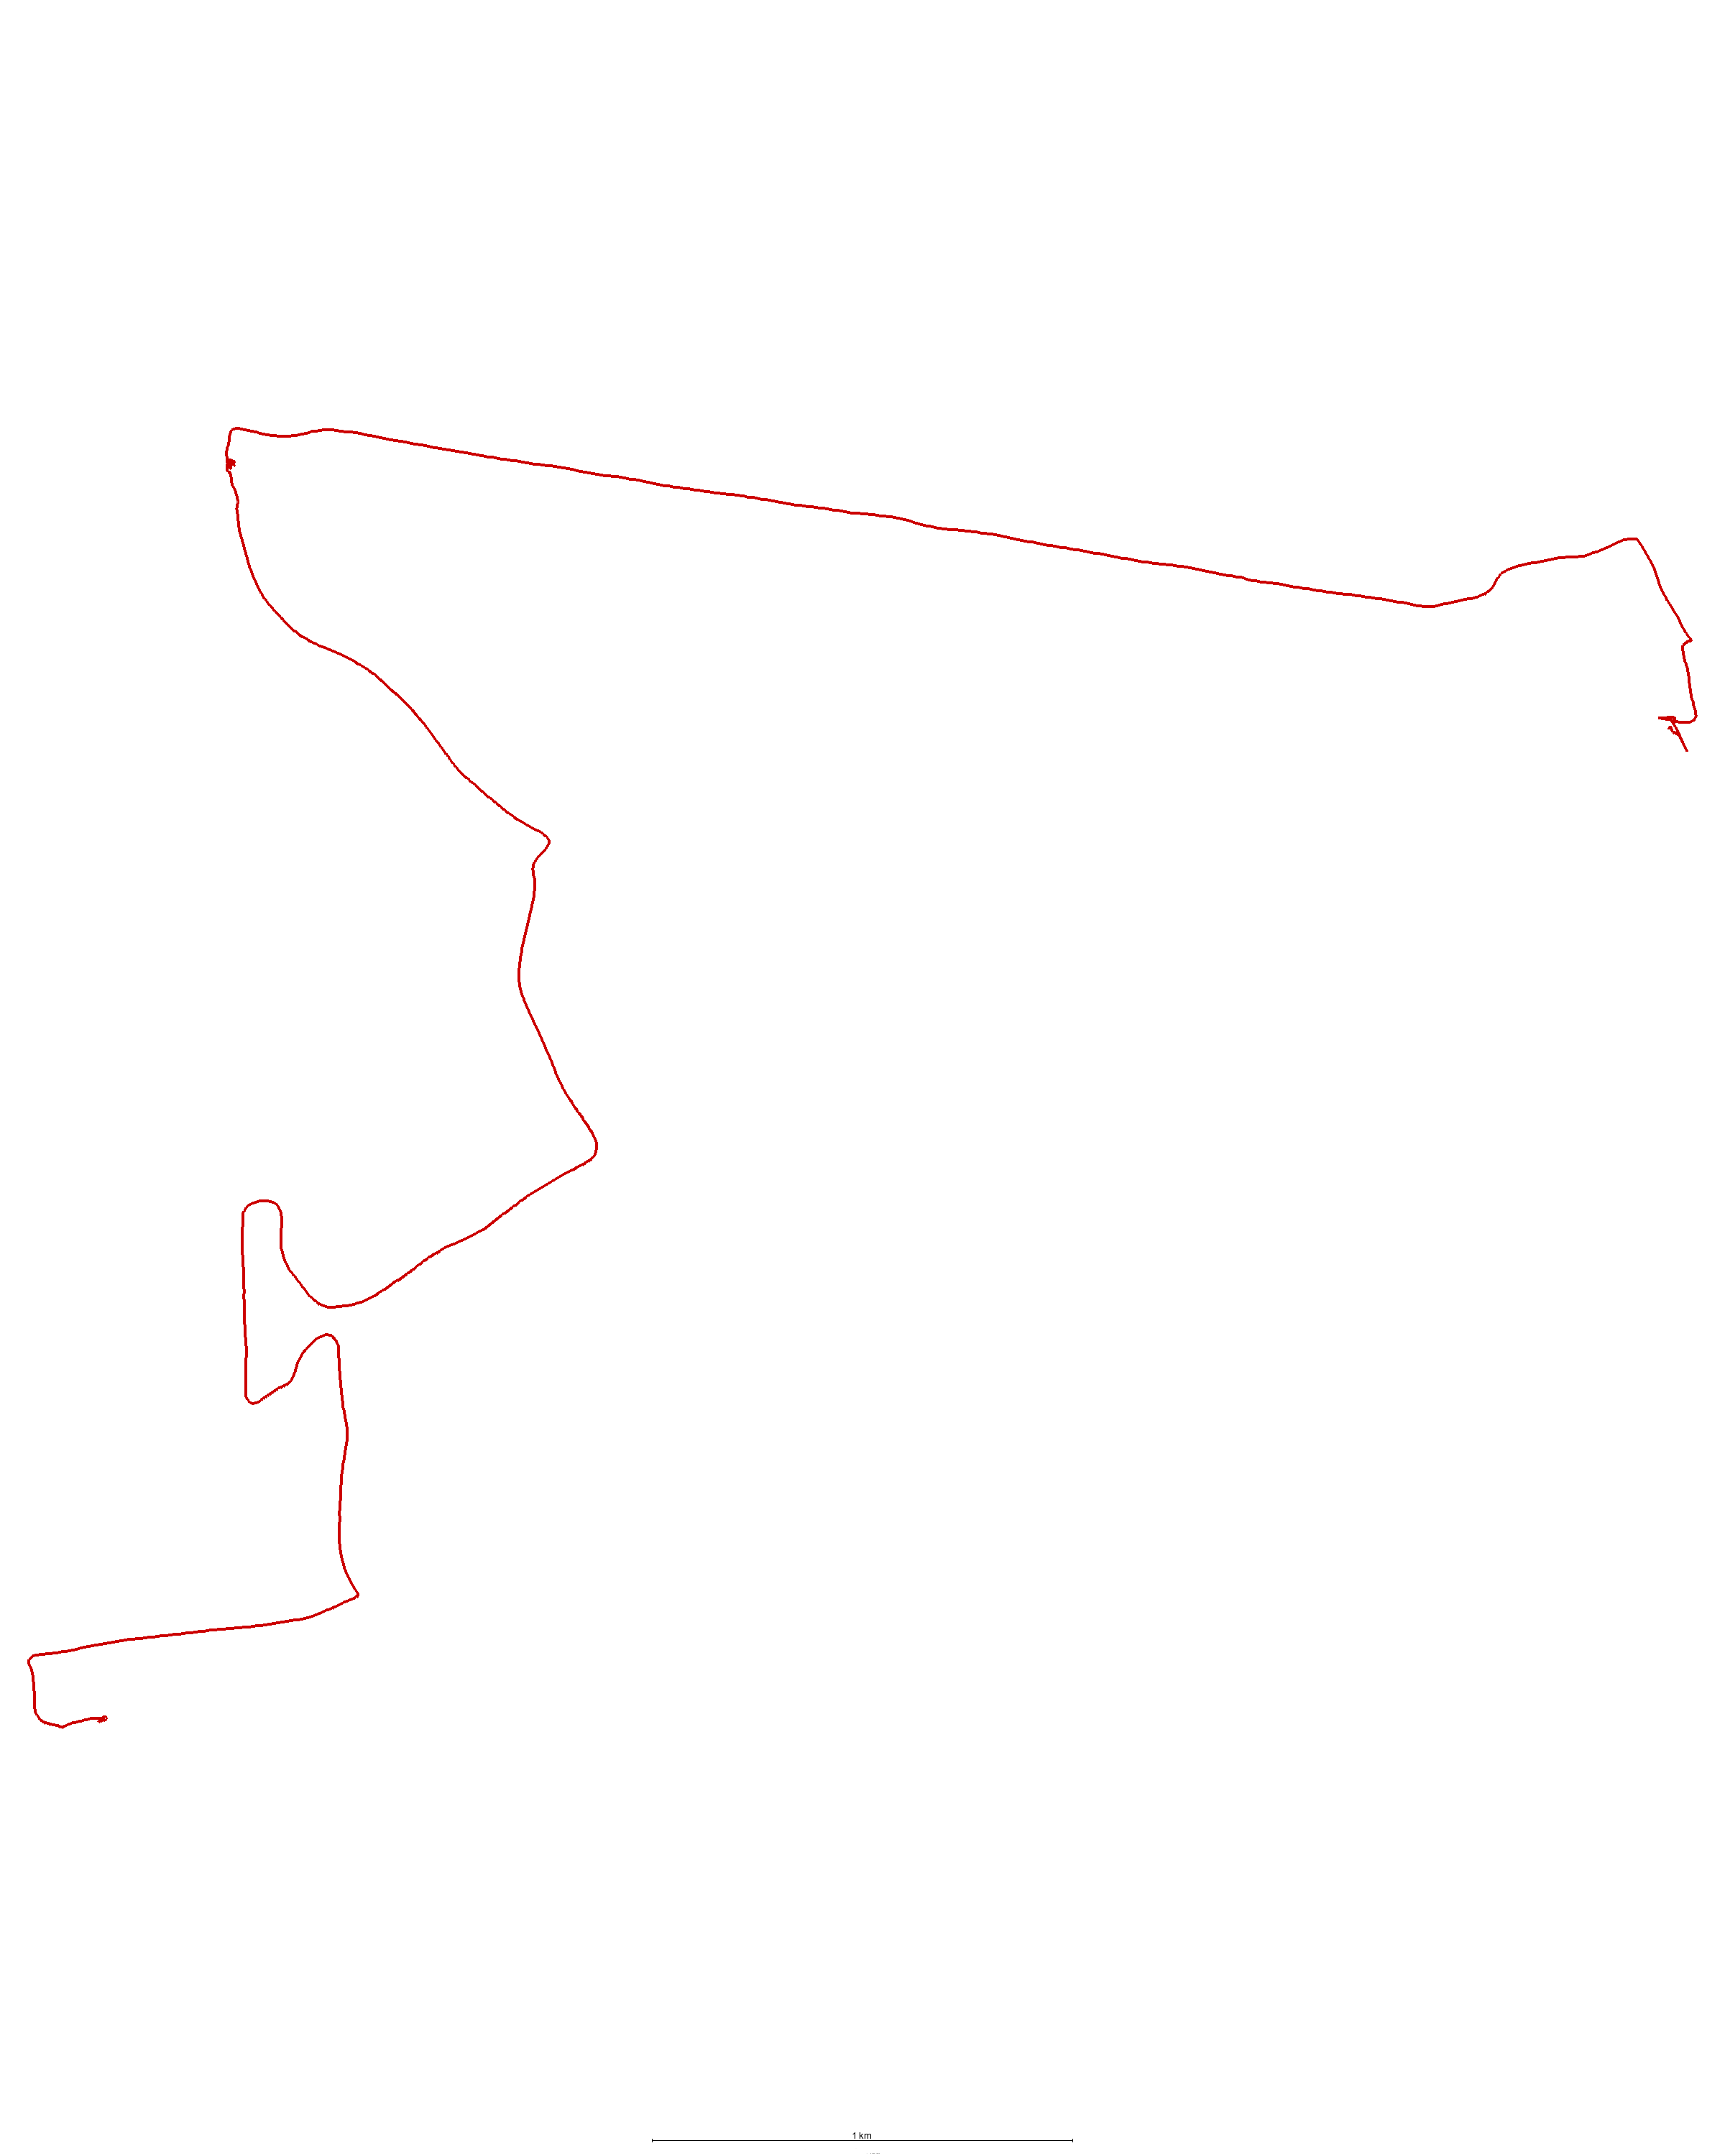 20211104171944-89191-map.png